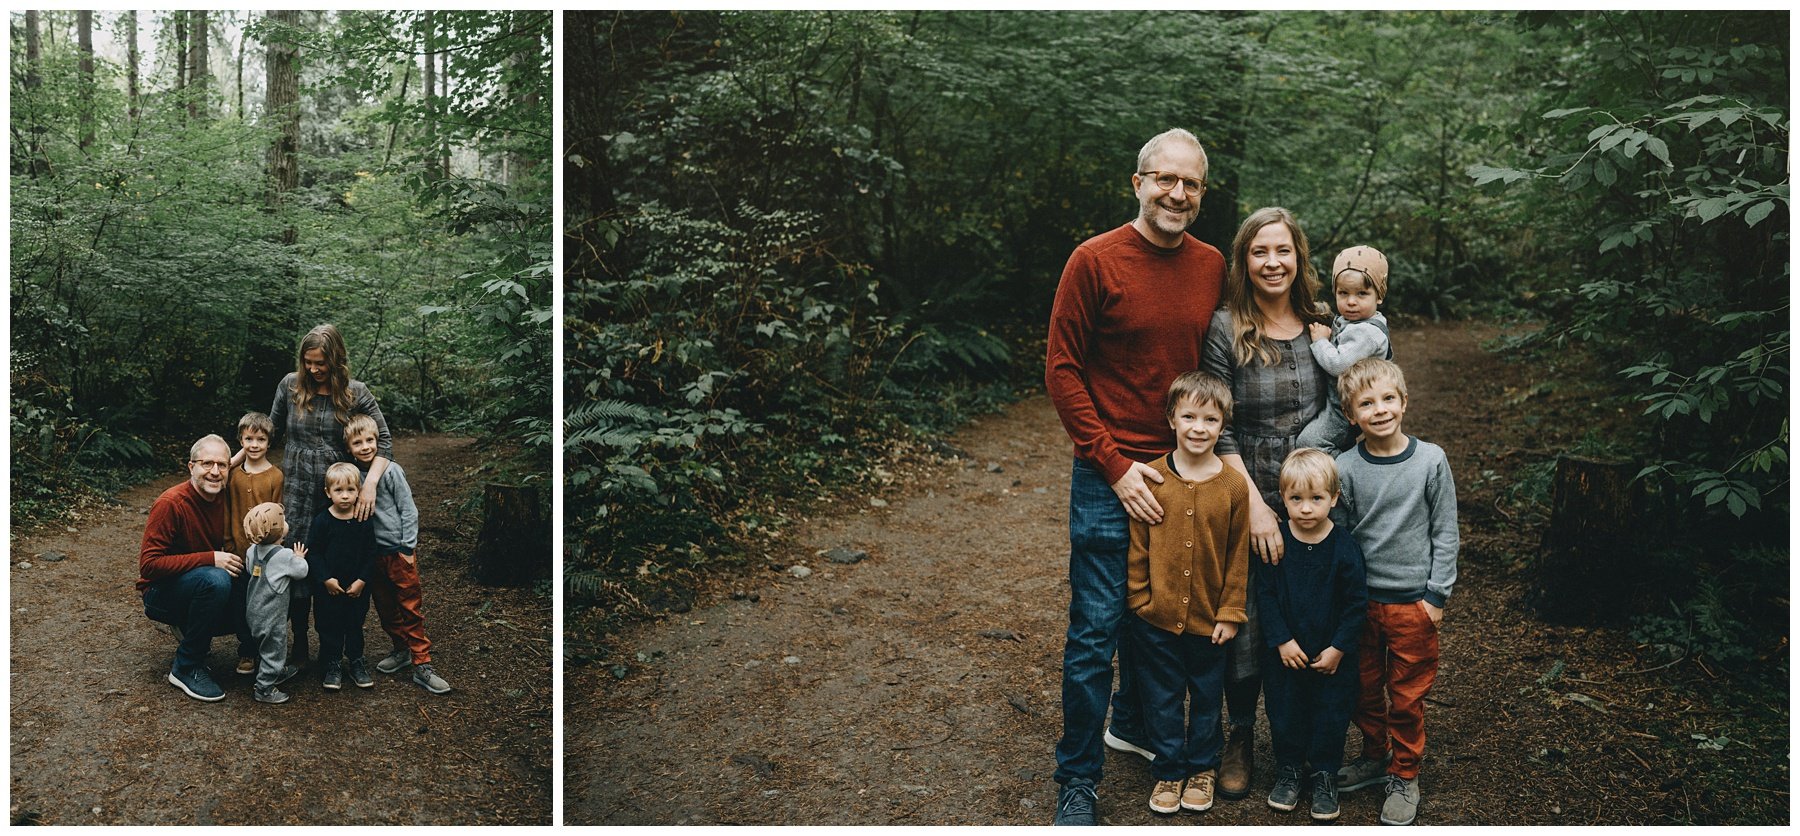 Vancouver Family Photographer || Jayme Lang || Spirit Pacific park Vancouver family photos_5050.jpg